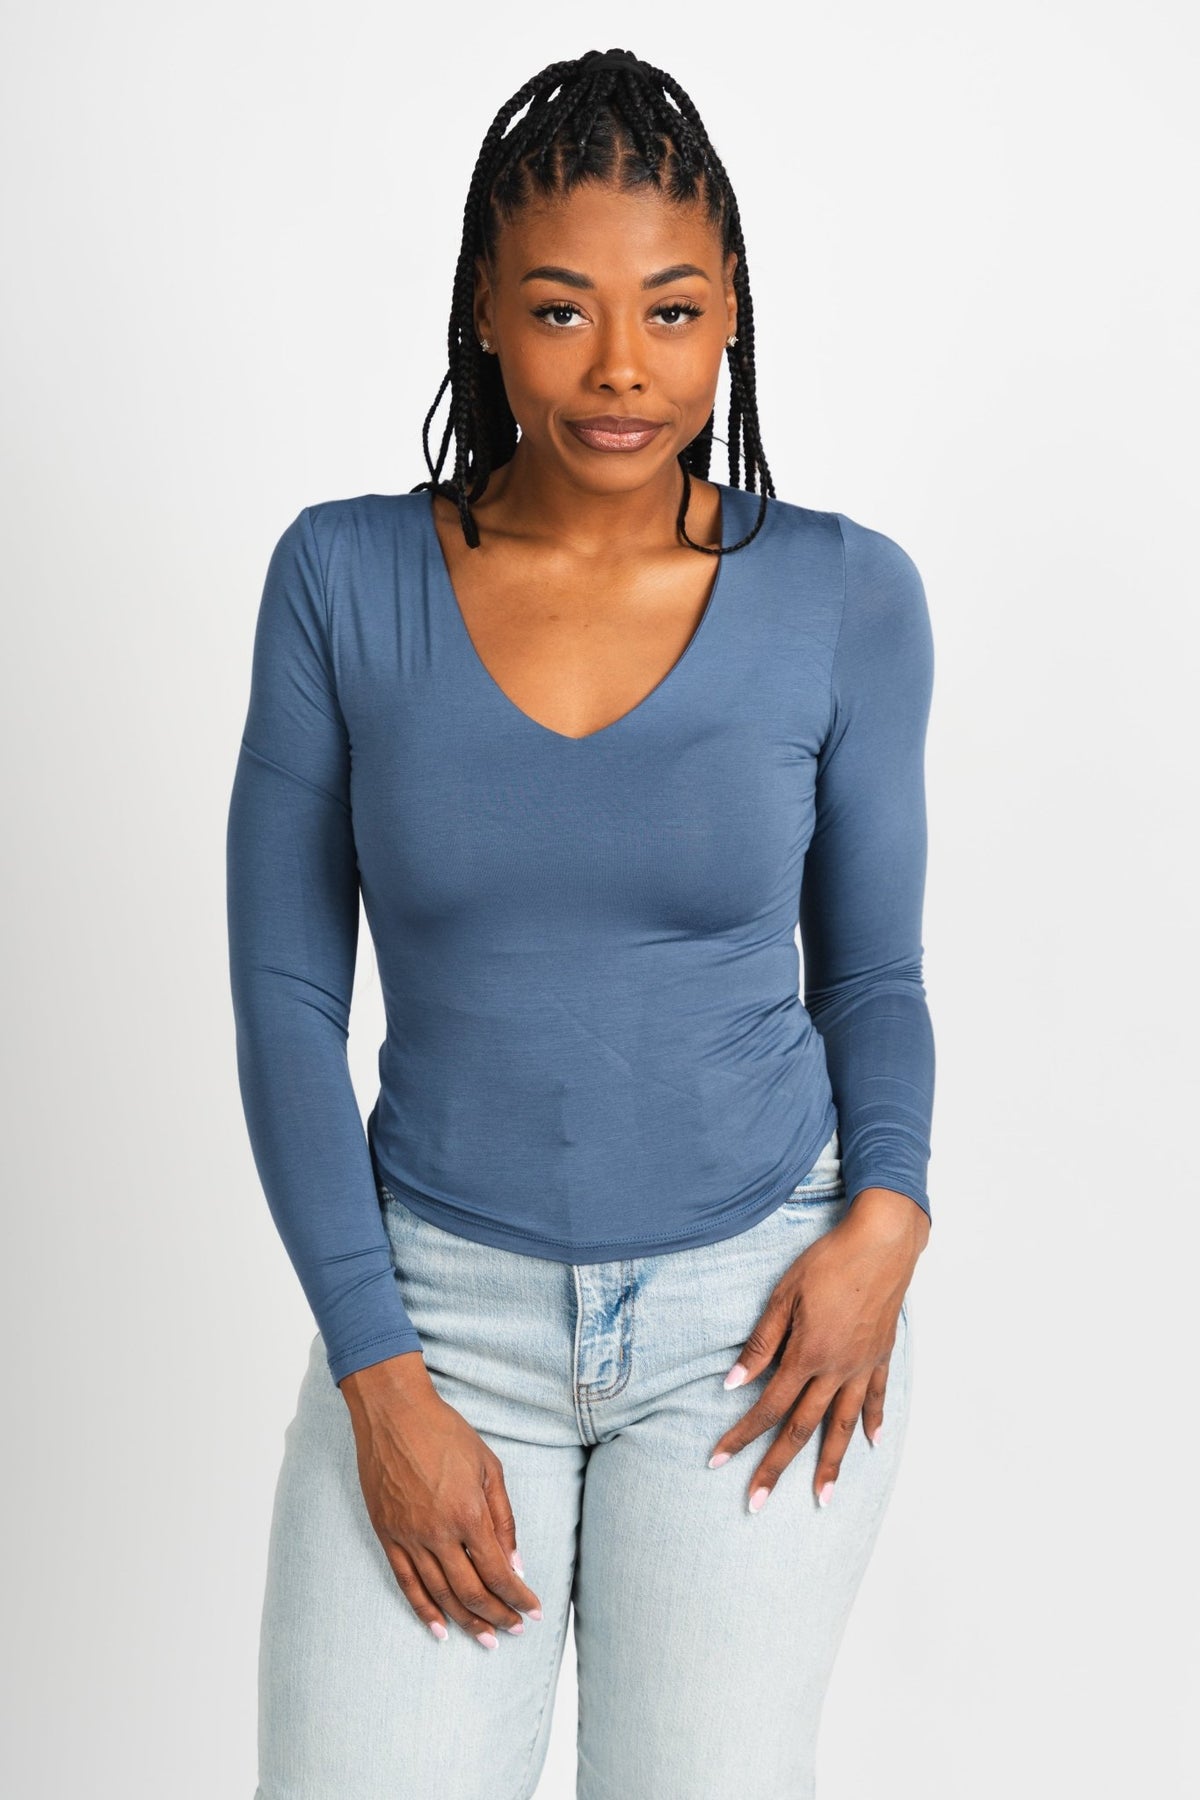 Modal long sleeve top modern navy - Trendy OKC Apparel at Lush Fashion Lounge Boutique in Oklahoma City